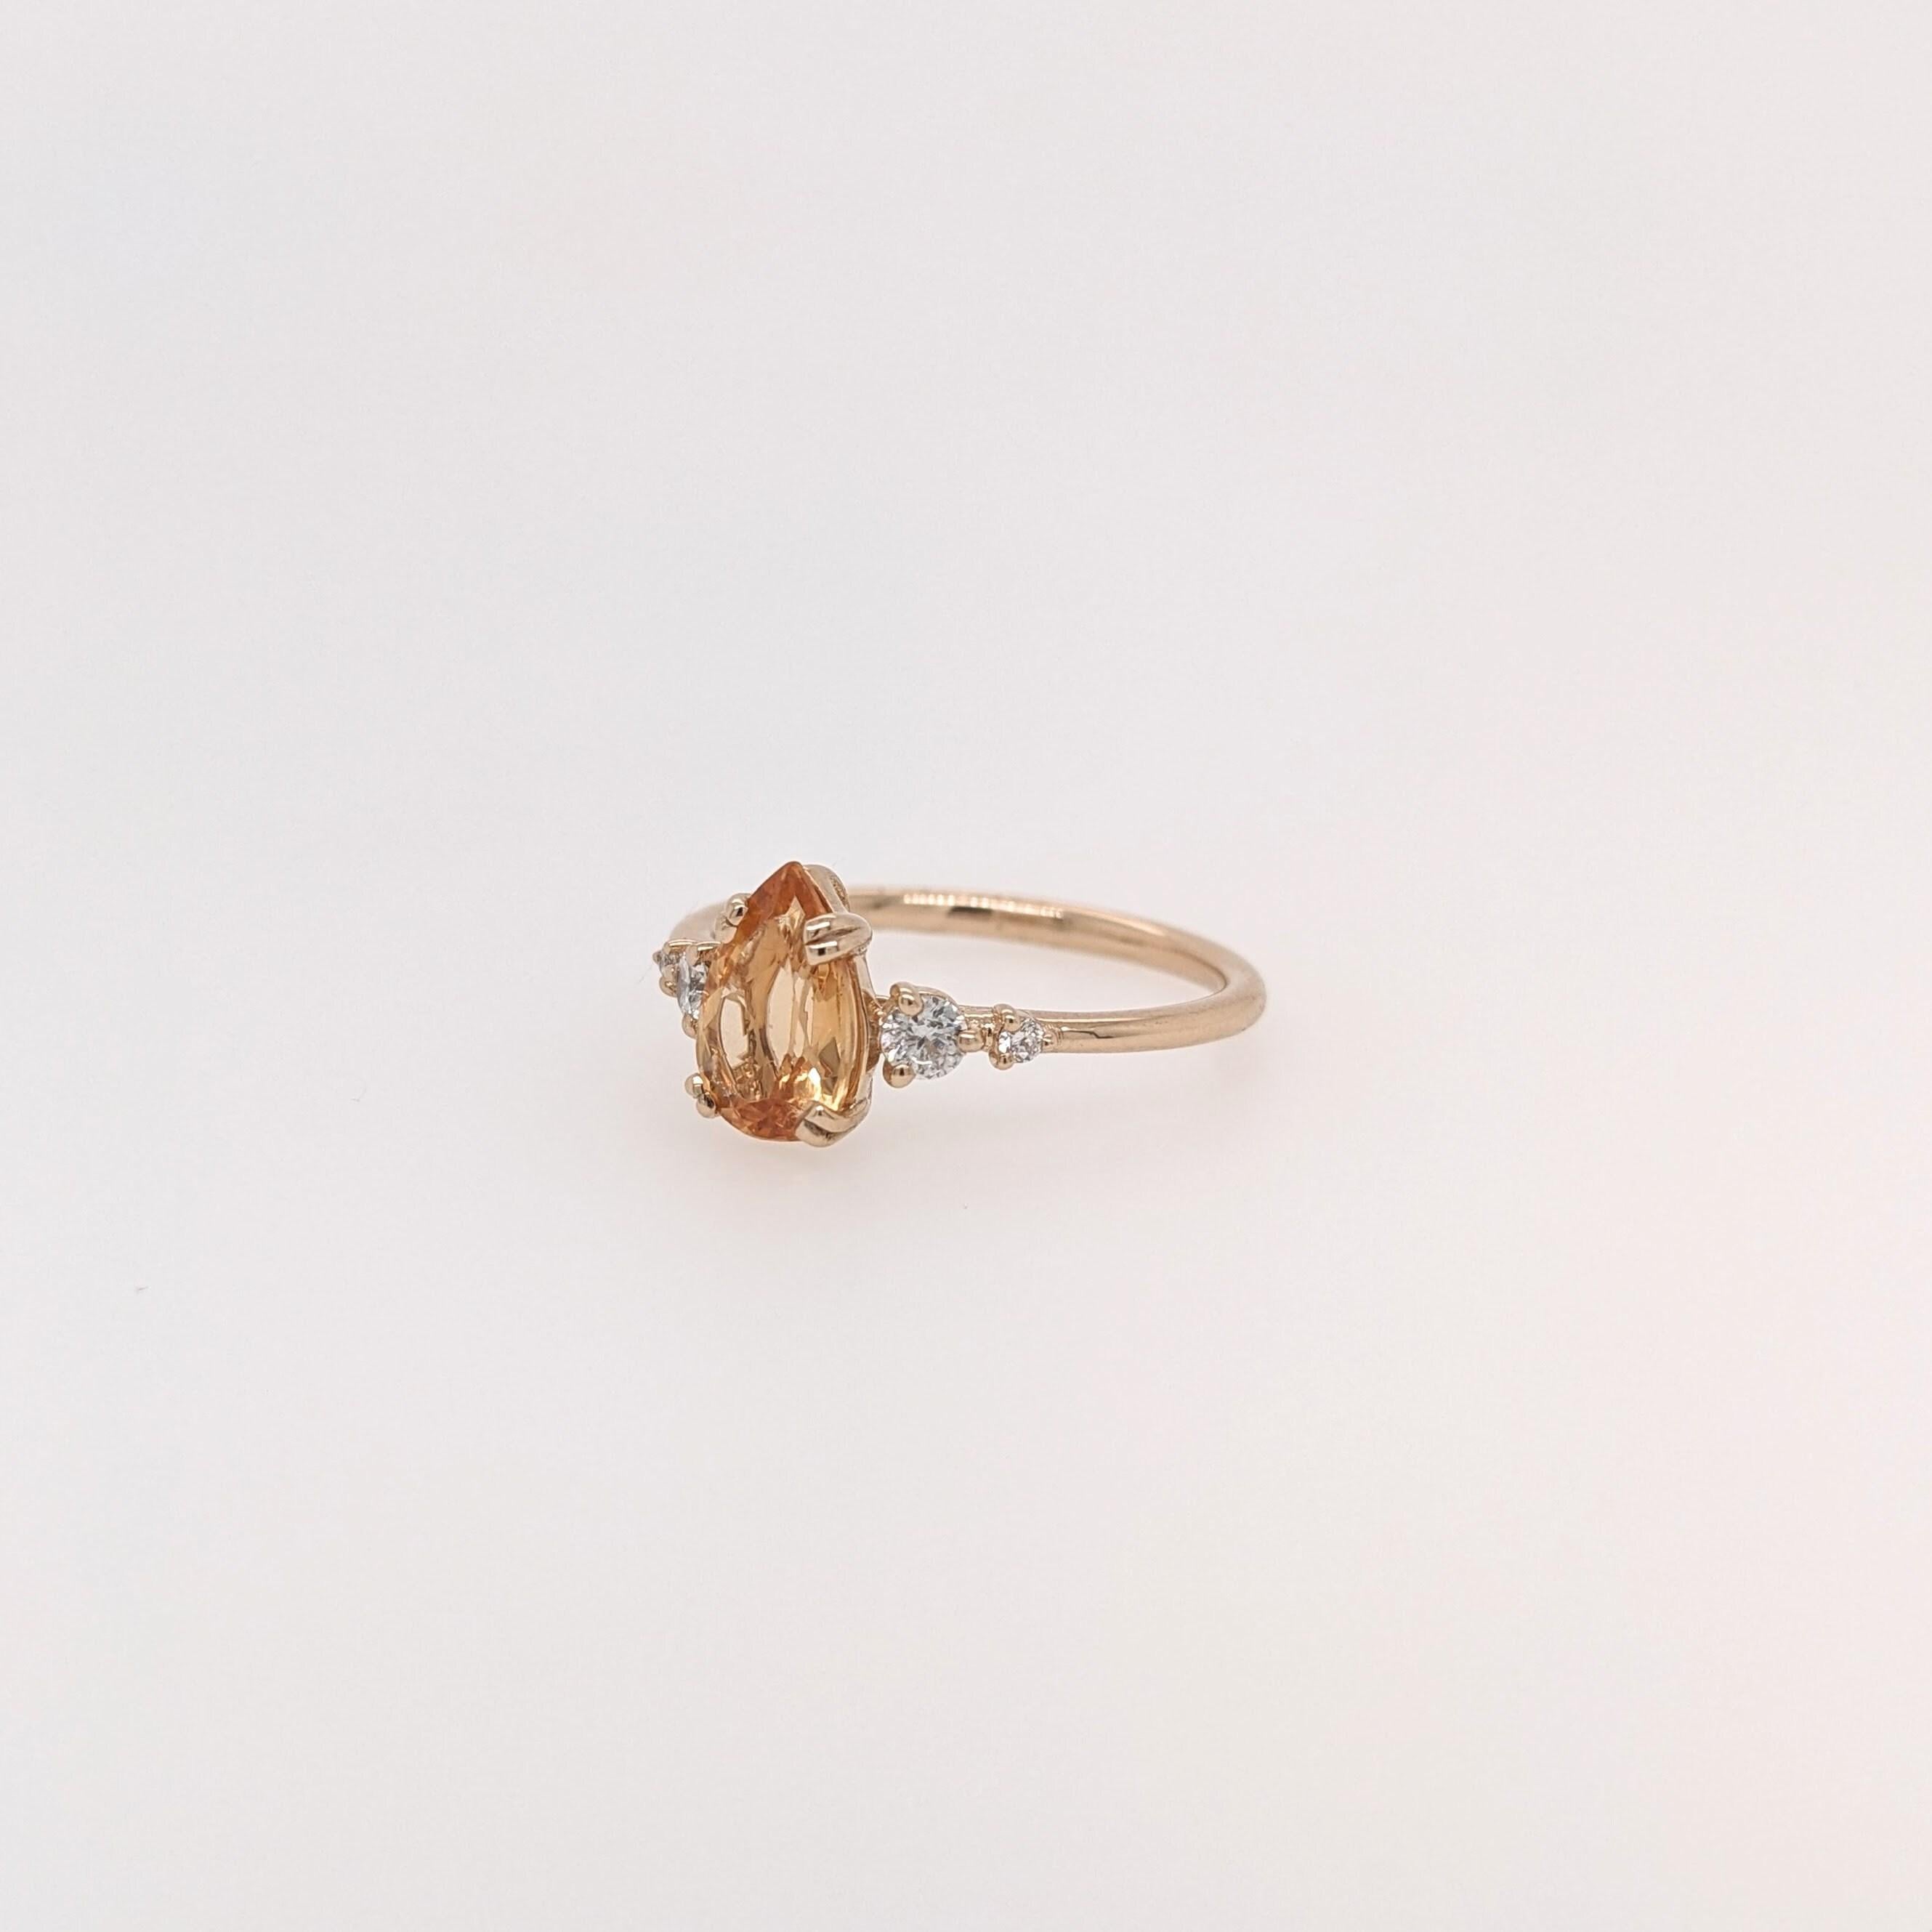 A sweet minimalist ring design featuring a peachy golden Imperial topaz in solid 14k white gold. A lovely golden sparkle to add to your daily outfit!

Specifications:

Item Type: Ring
Center Stone: Imperial Topaz
Treatment: Heated
Weight: